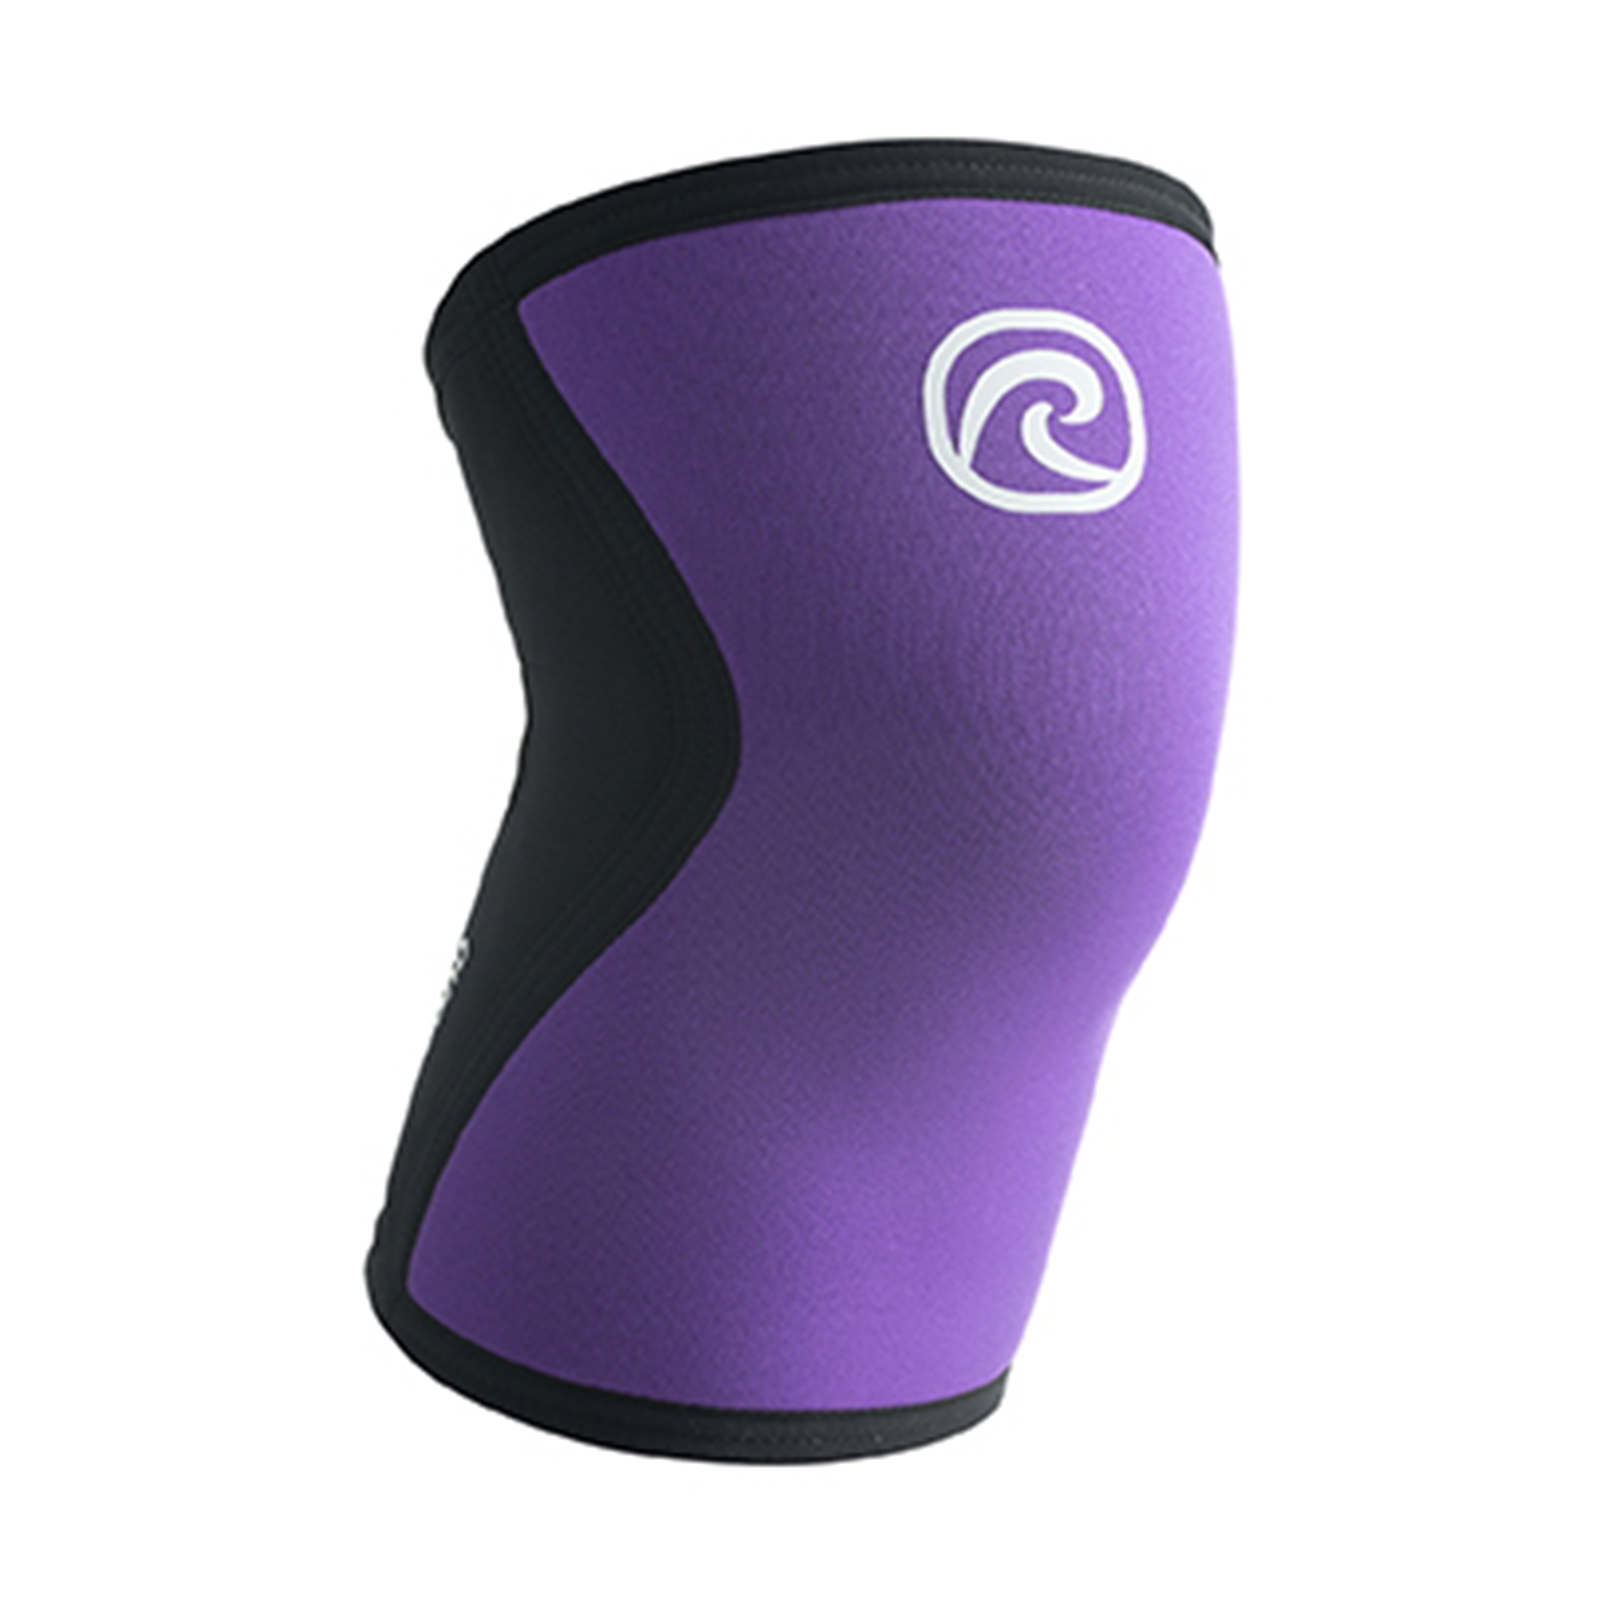 A purple and black knee sleeve with a white Rehband logo at the top